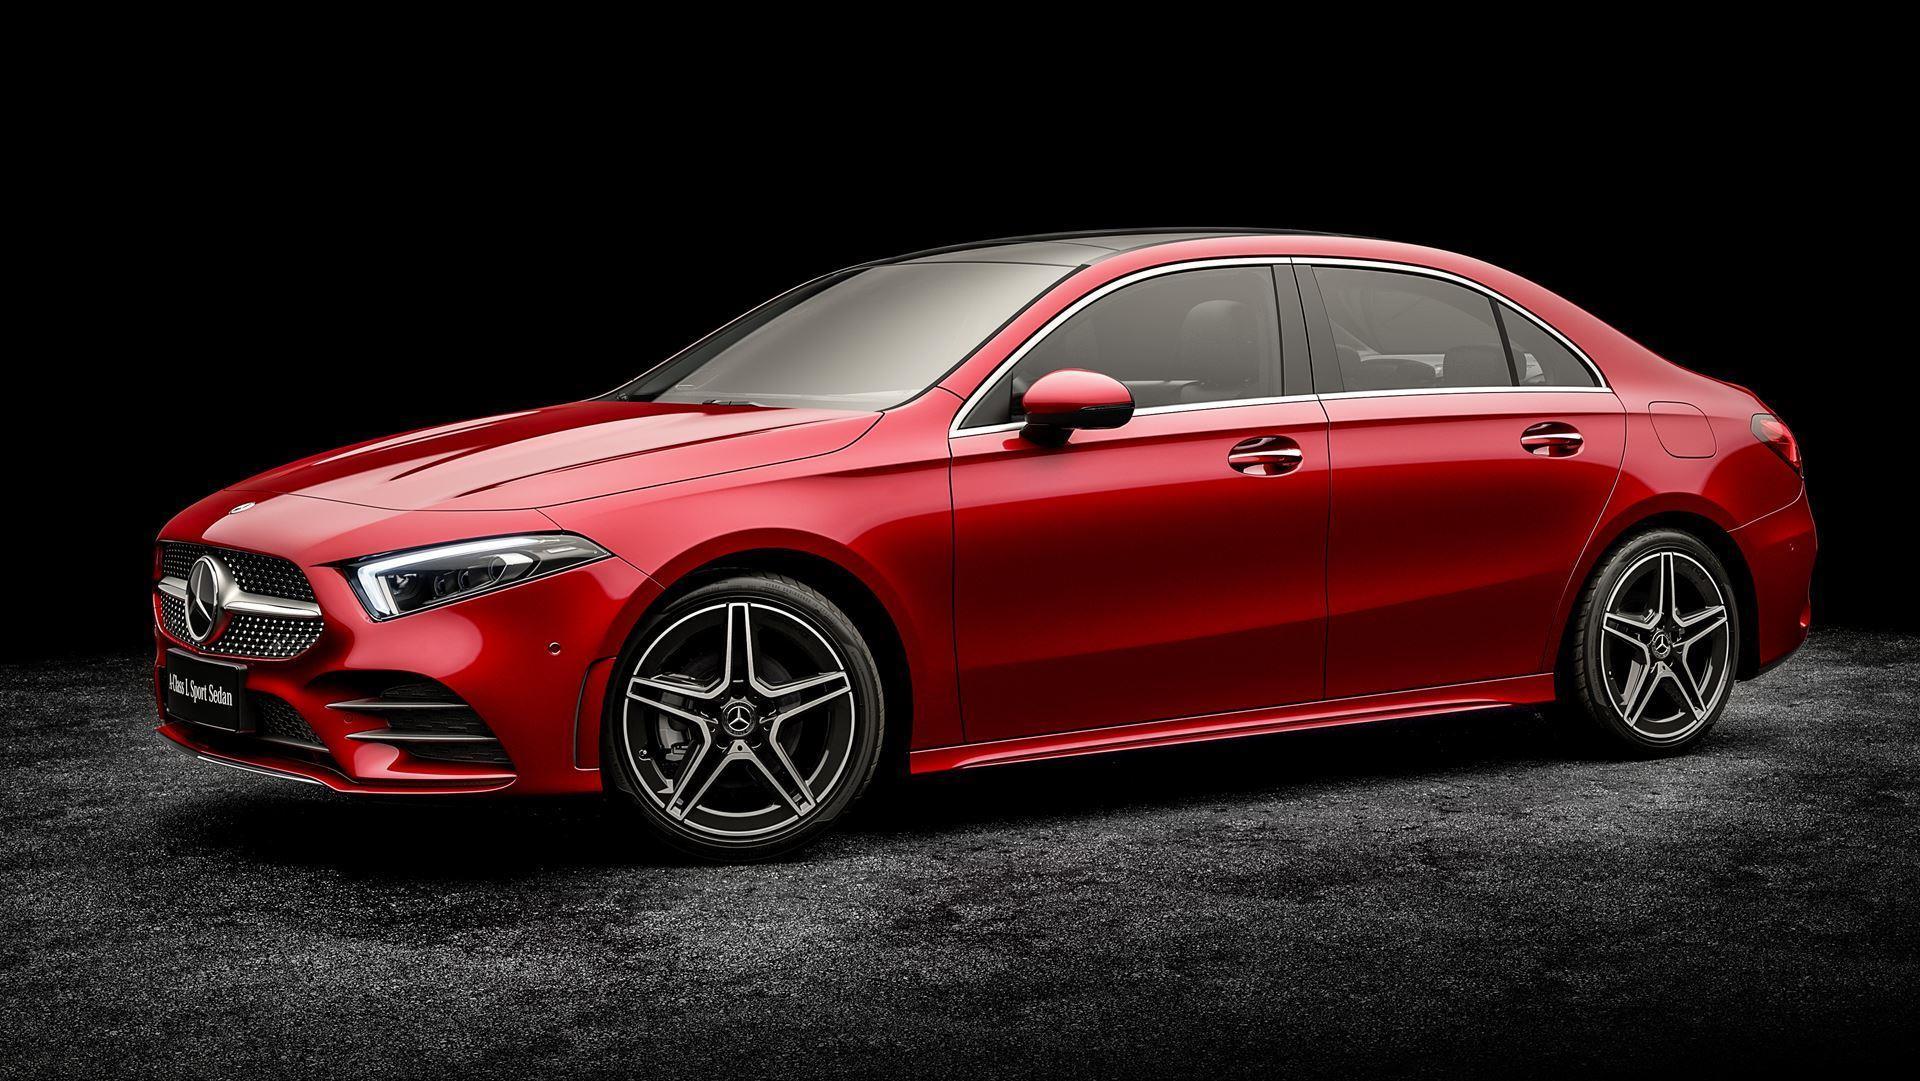 Mercedes Benz A Class L Wallpaper And Image Gallery